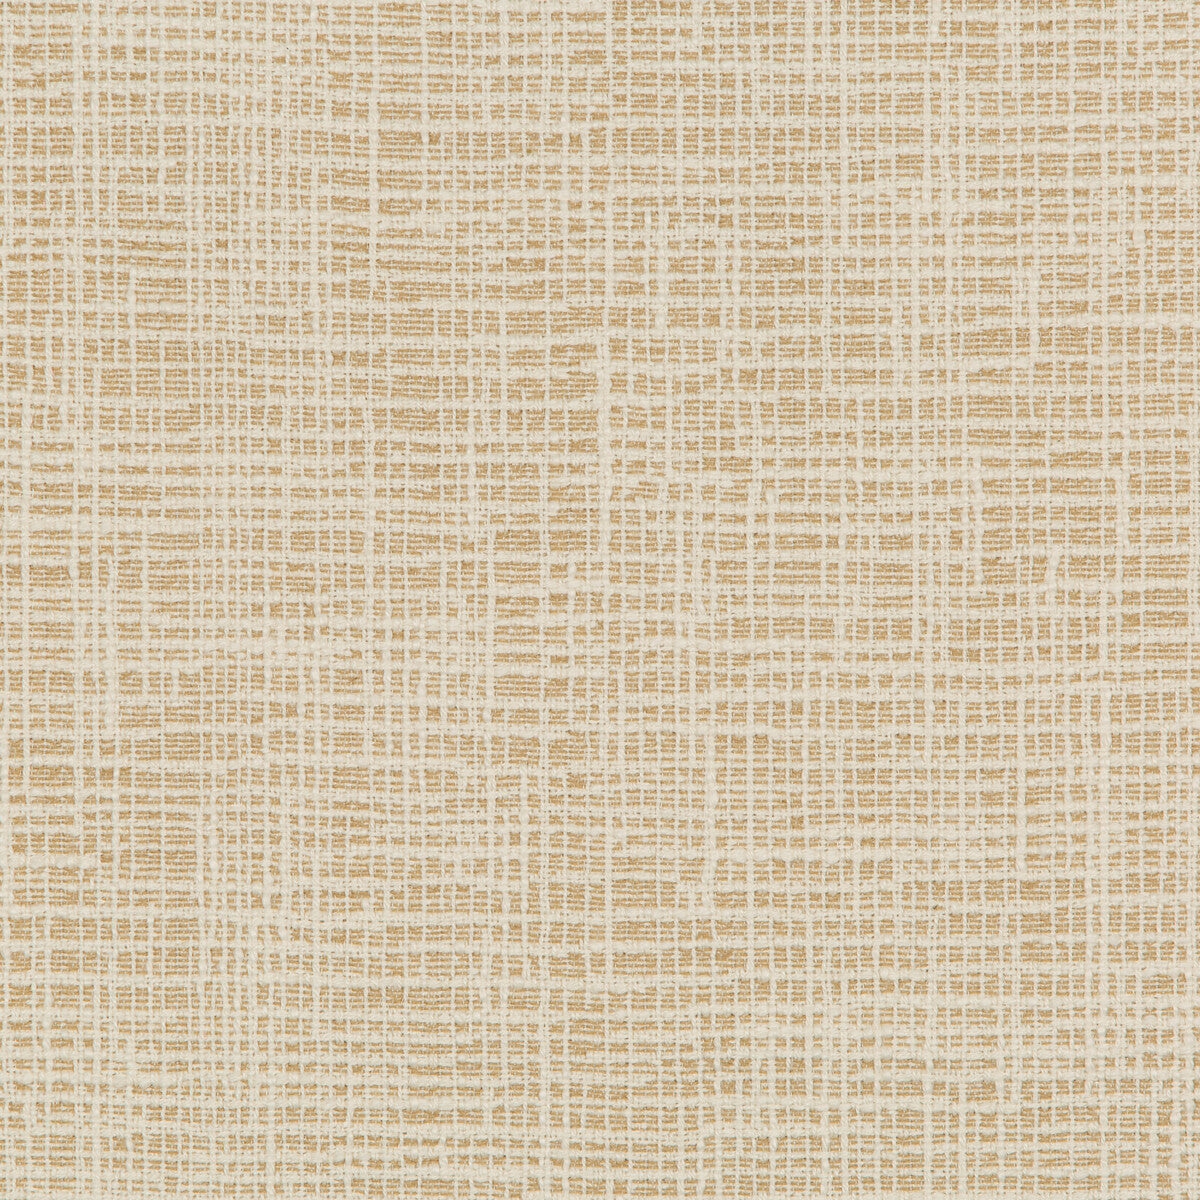 Kravet Design fabric in 36083-16 color - pattern 36083.16.0 - by Kravet Design in the Inside Out Performance Fabrics collection